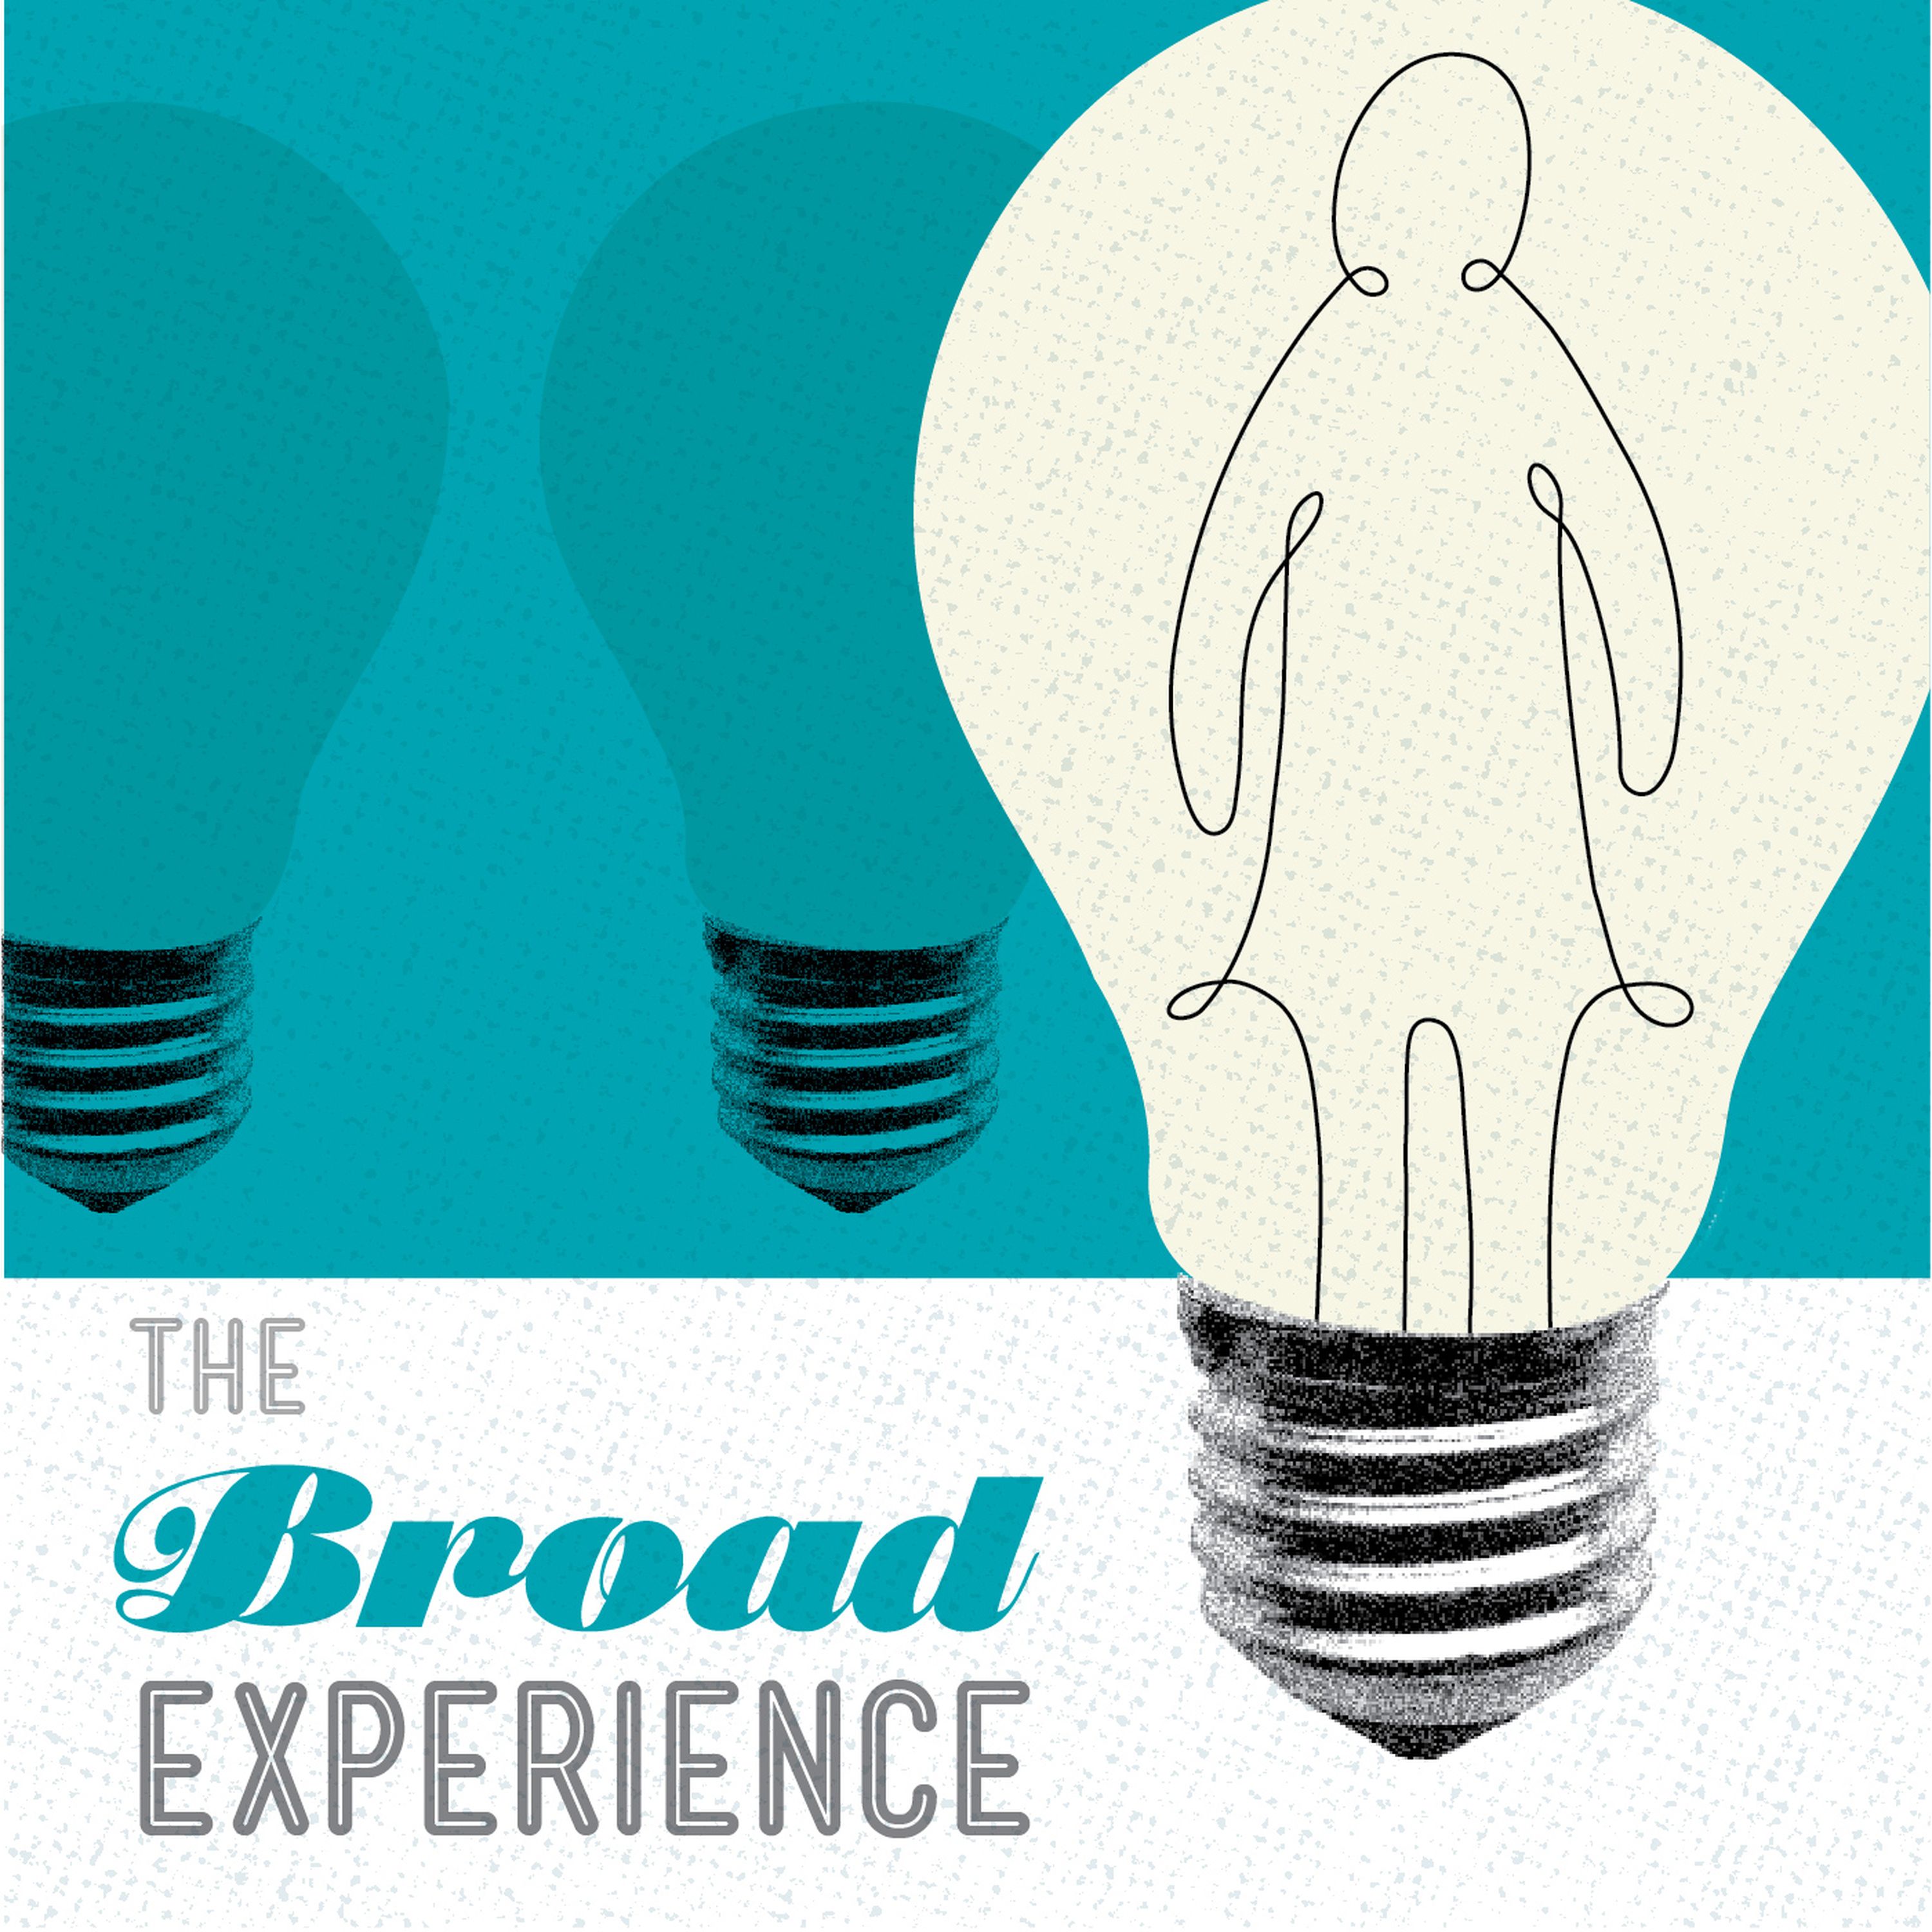 The Broad Experience 67: How to Make the Most of Your Time